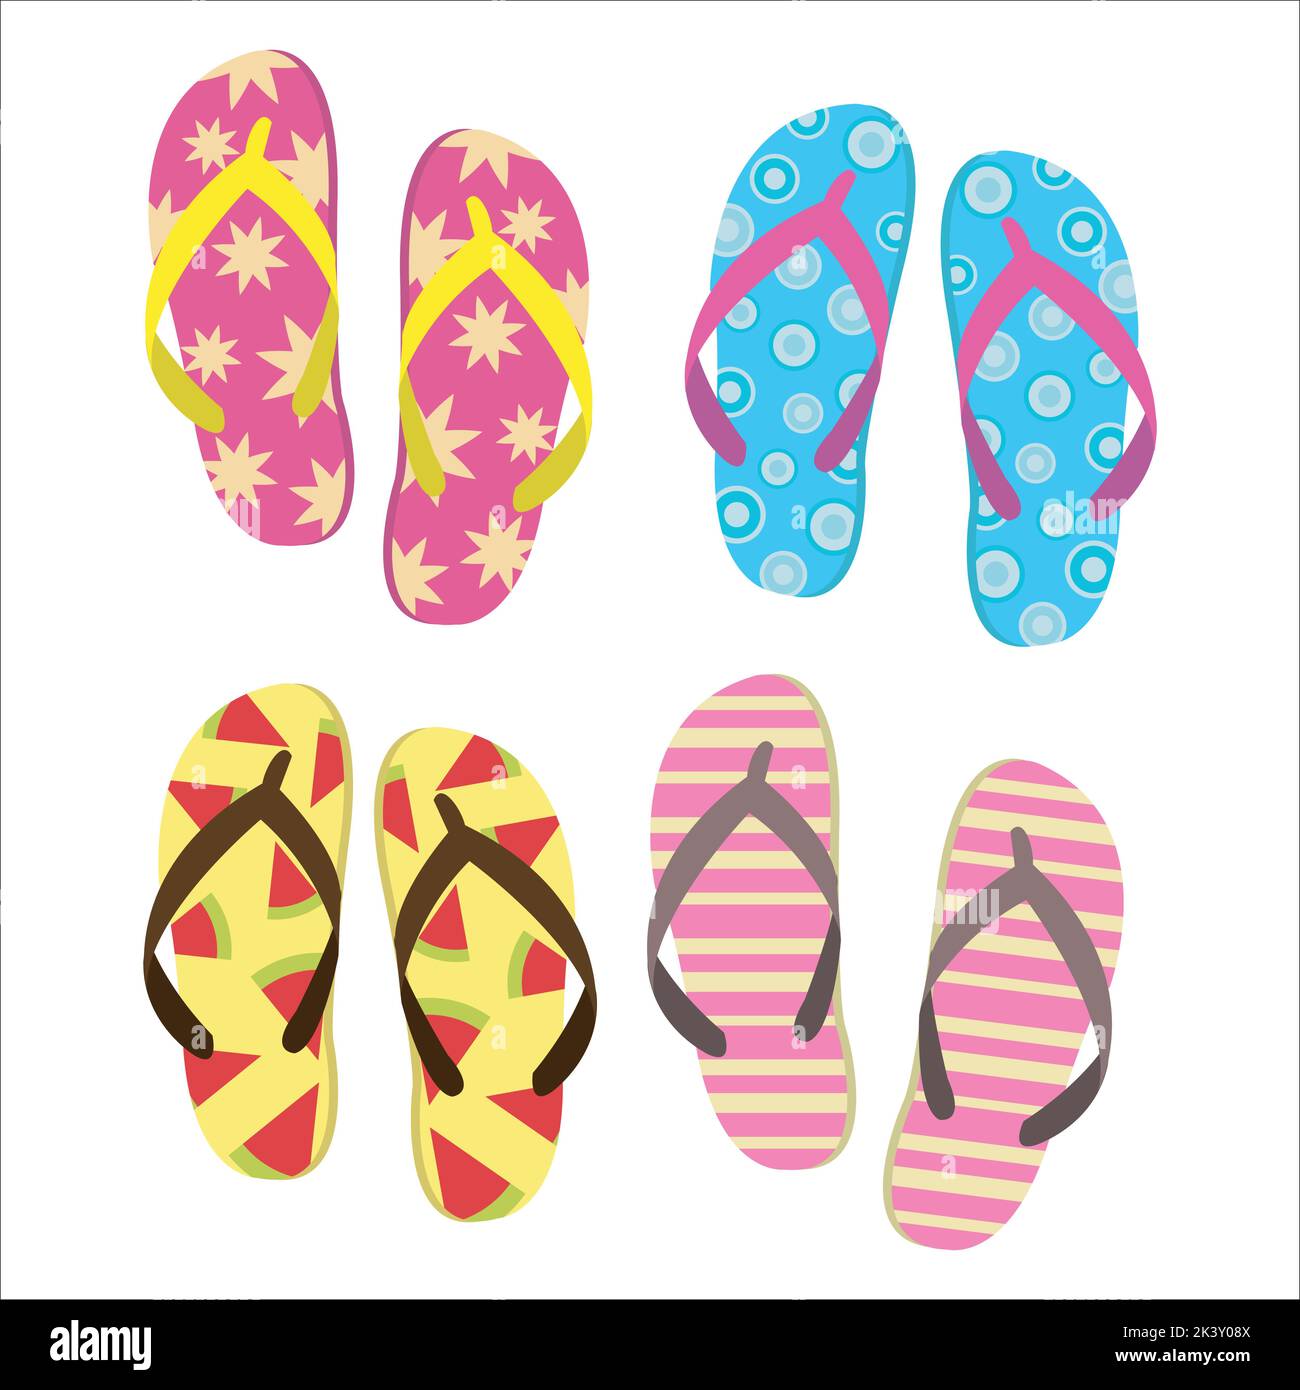 Vector Set Of Colorful Flip Flops Illustration Isolated On White ...